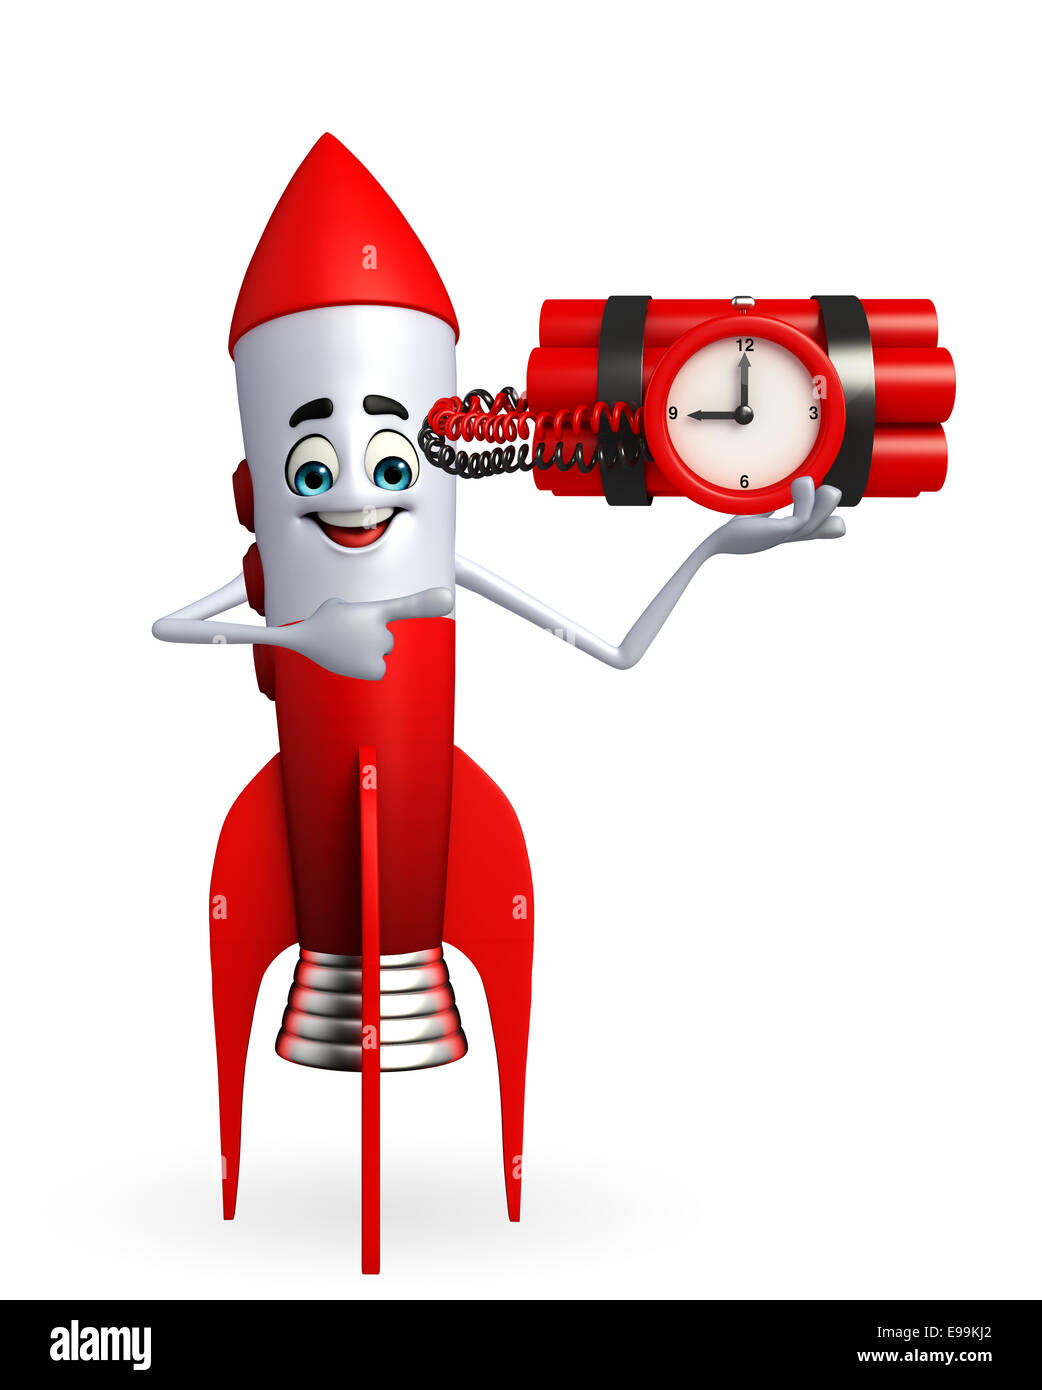 Cartoon character of rocket with time bomb Stock Photo